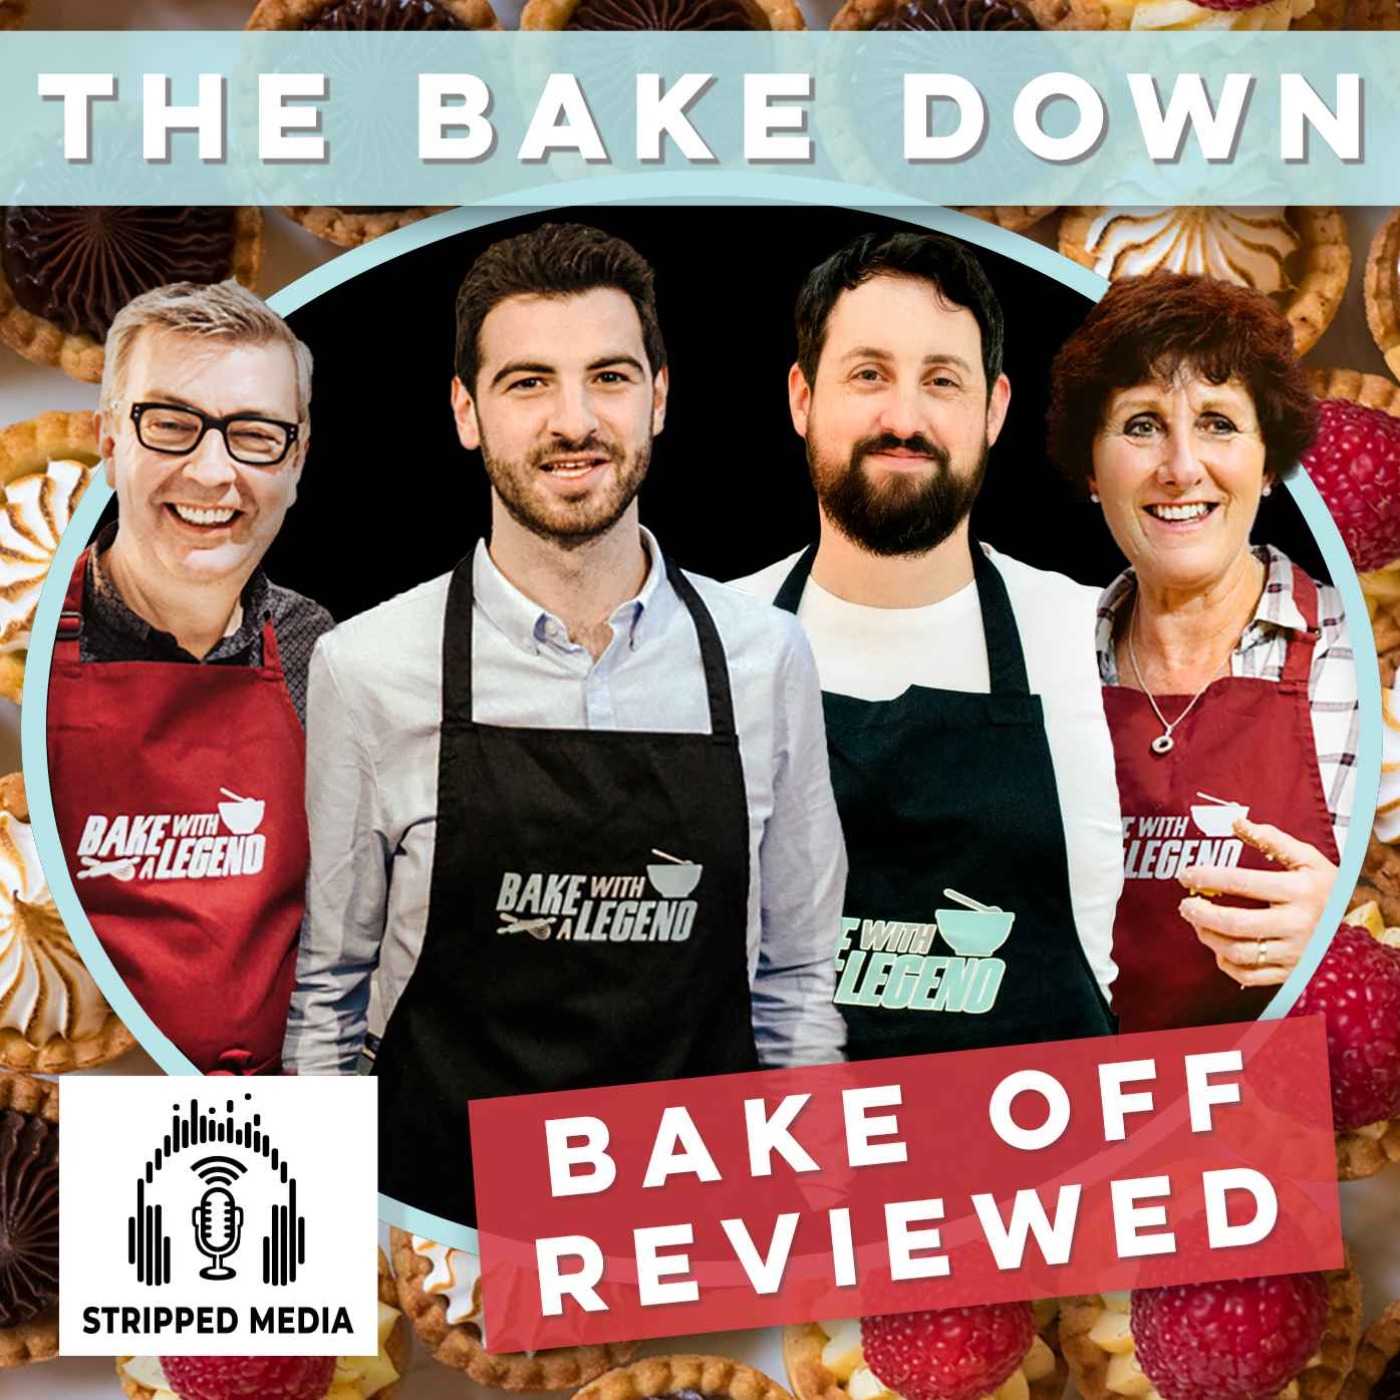 We Wish You A Merry Bake Off